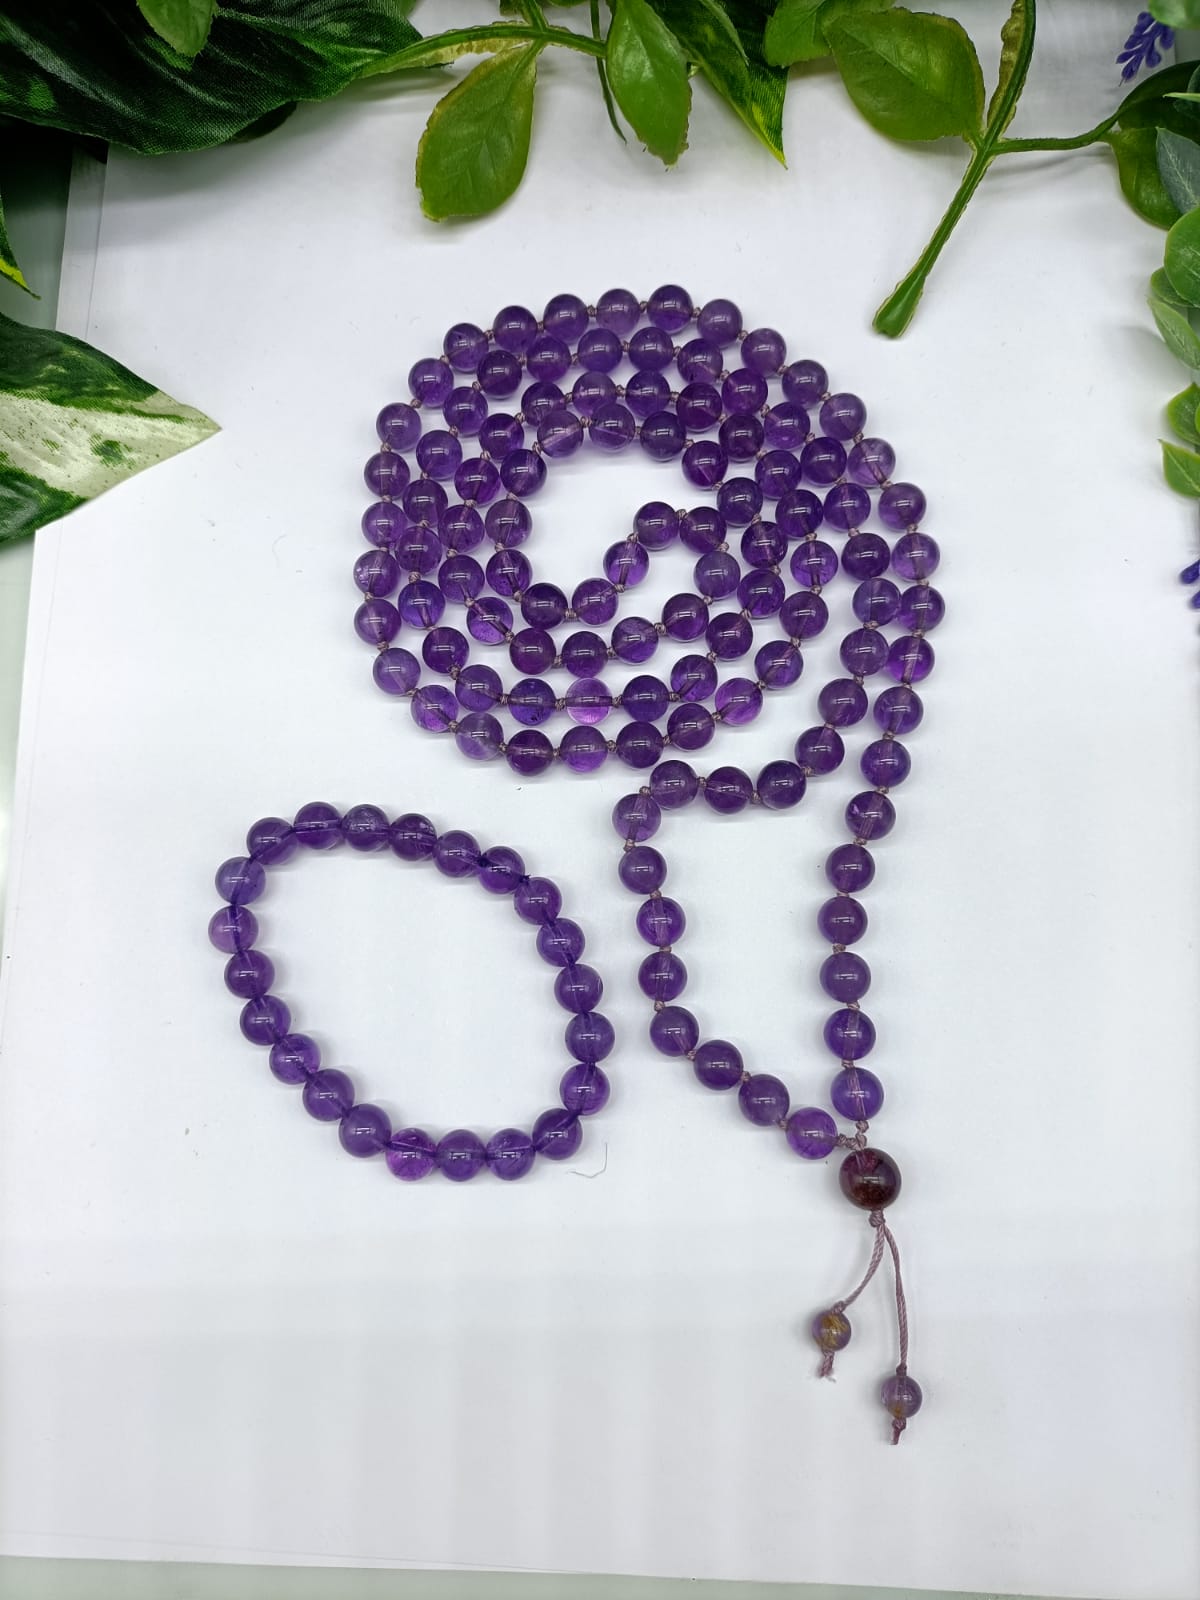 Amethyst Mala Beads 8mm with Bracelet Included Crystal Wellness